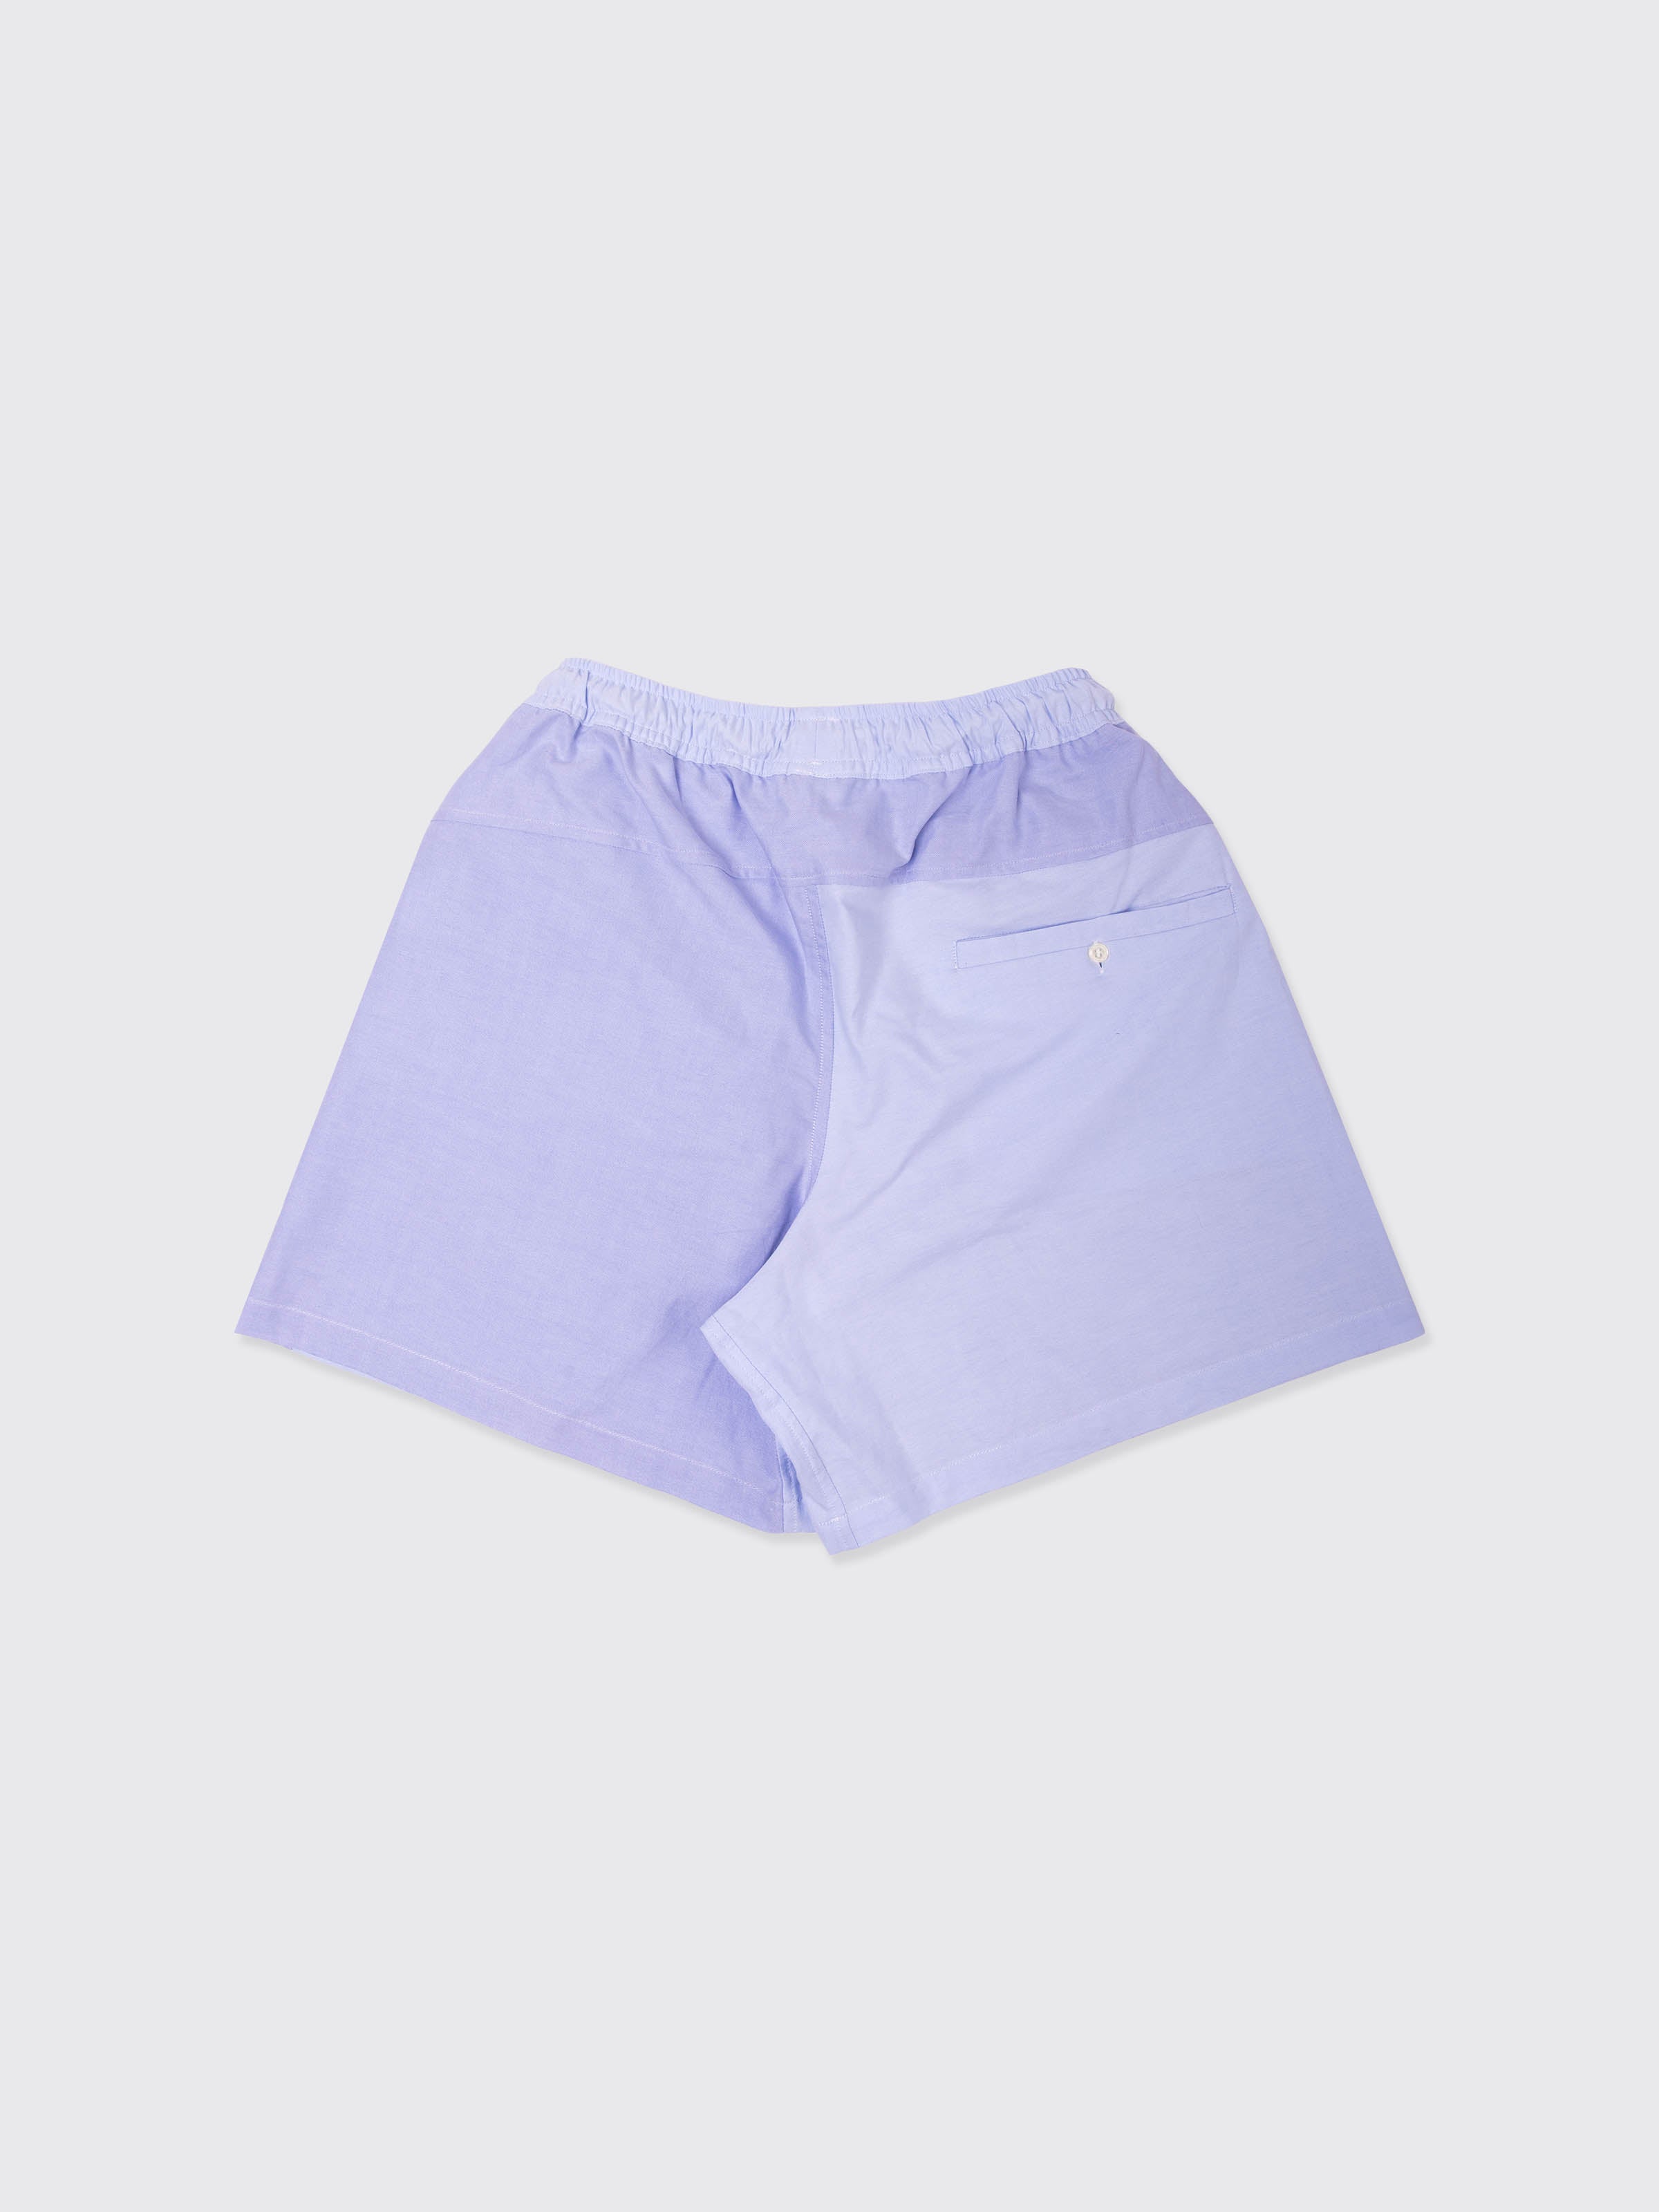 "Oxford Pack" Shorts Blue